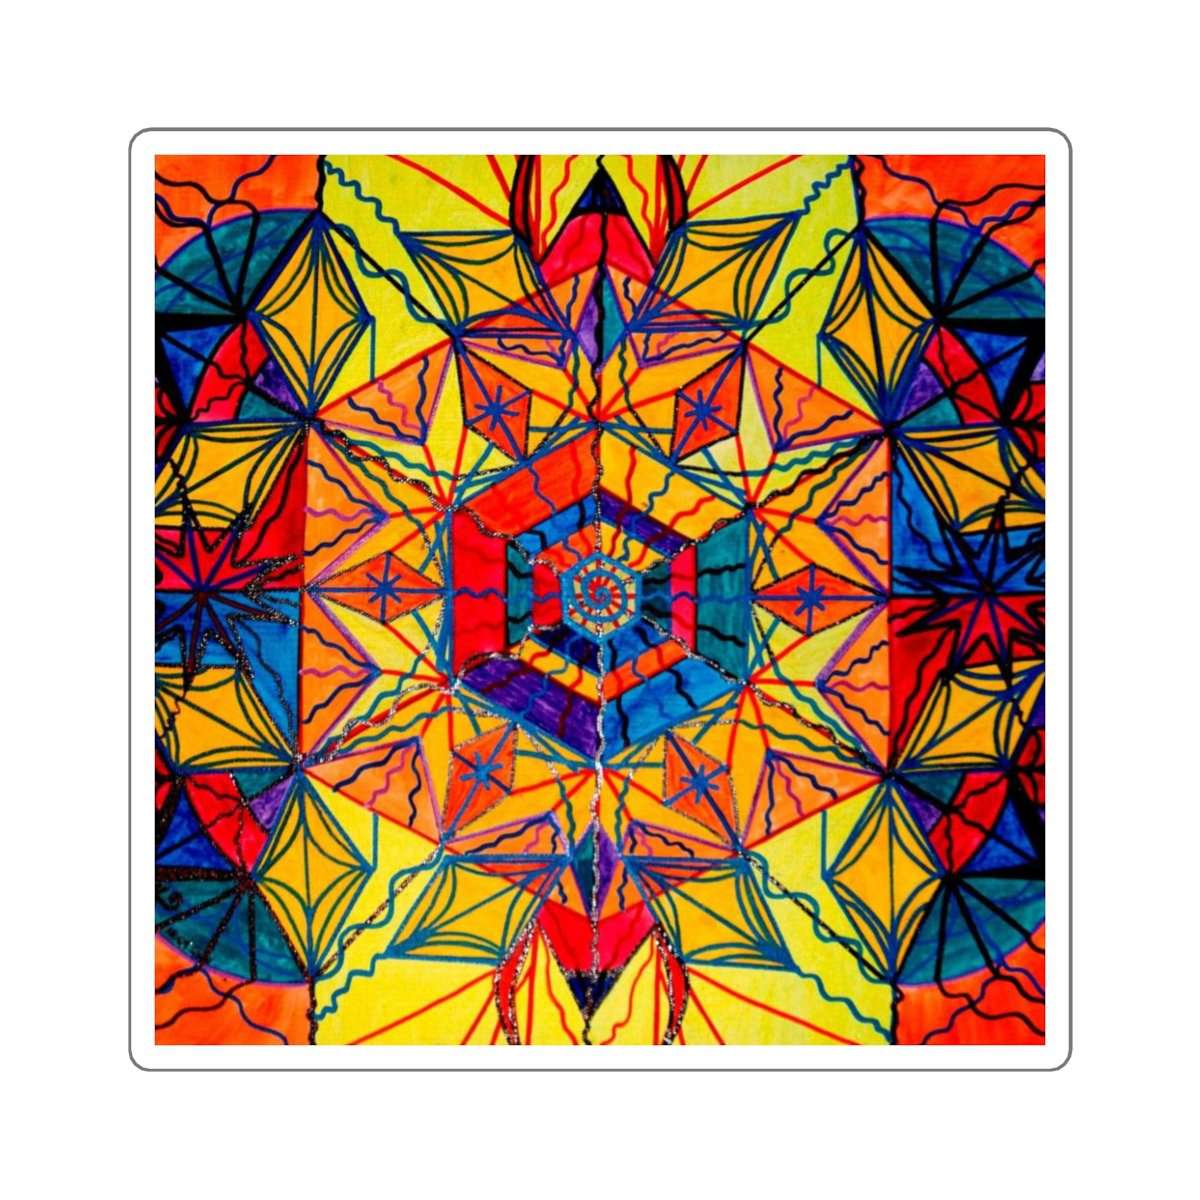 buy-cheap-wholesale-excitement-square-stickers-online-now_4.jpg